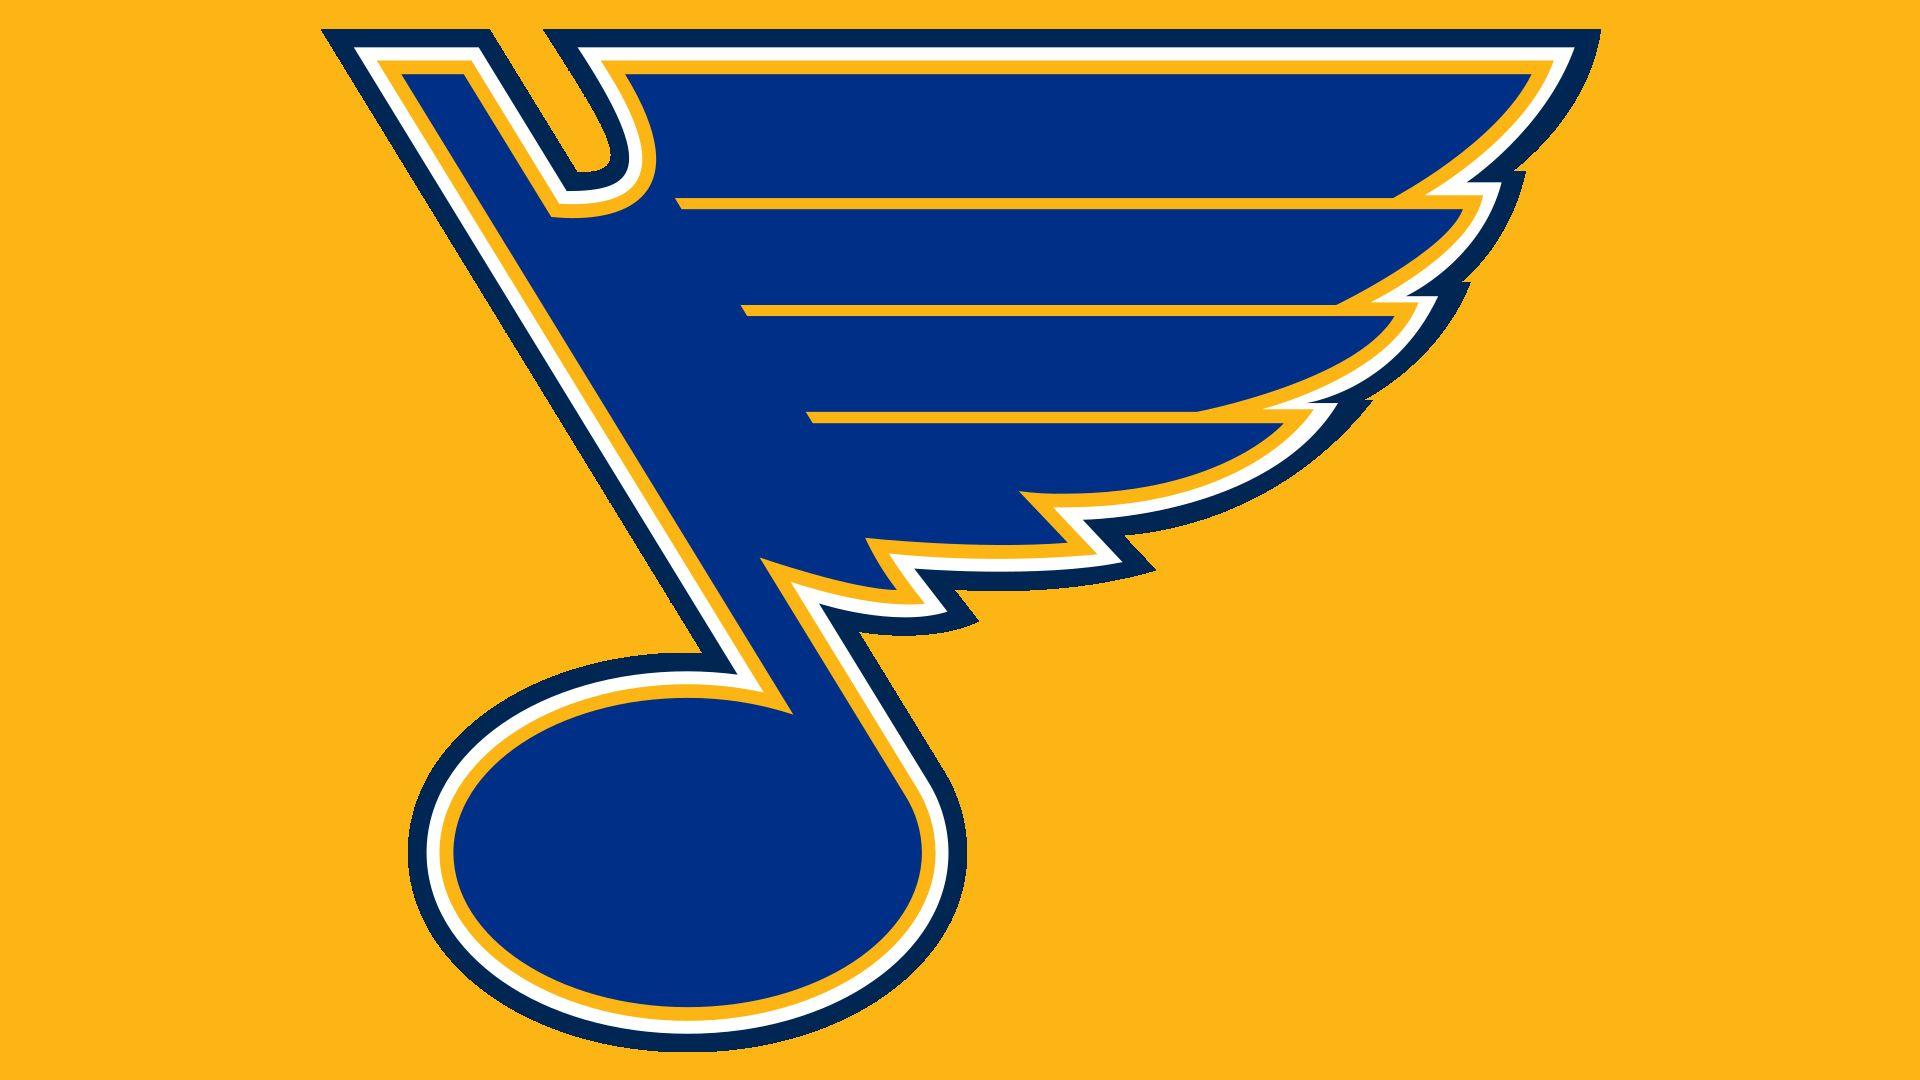 St. Louis Blues Hockey Logo - St. Louis Blues Logo, St. Louis Blues Symbol, Meaning, History and ...